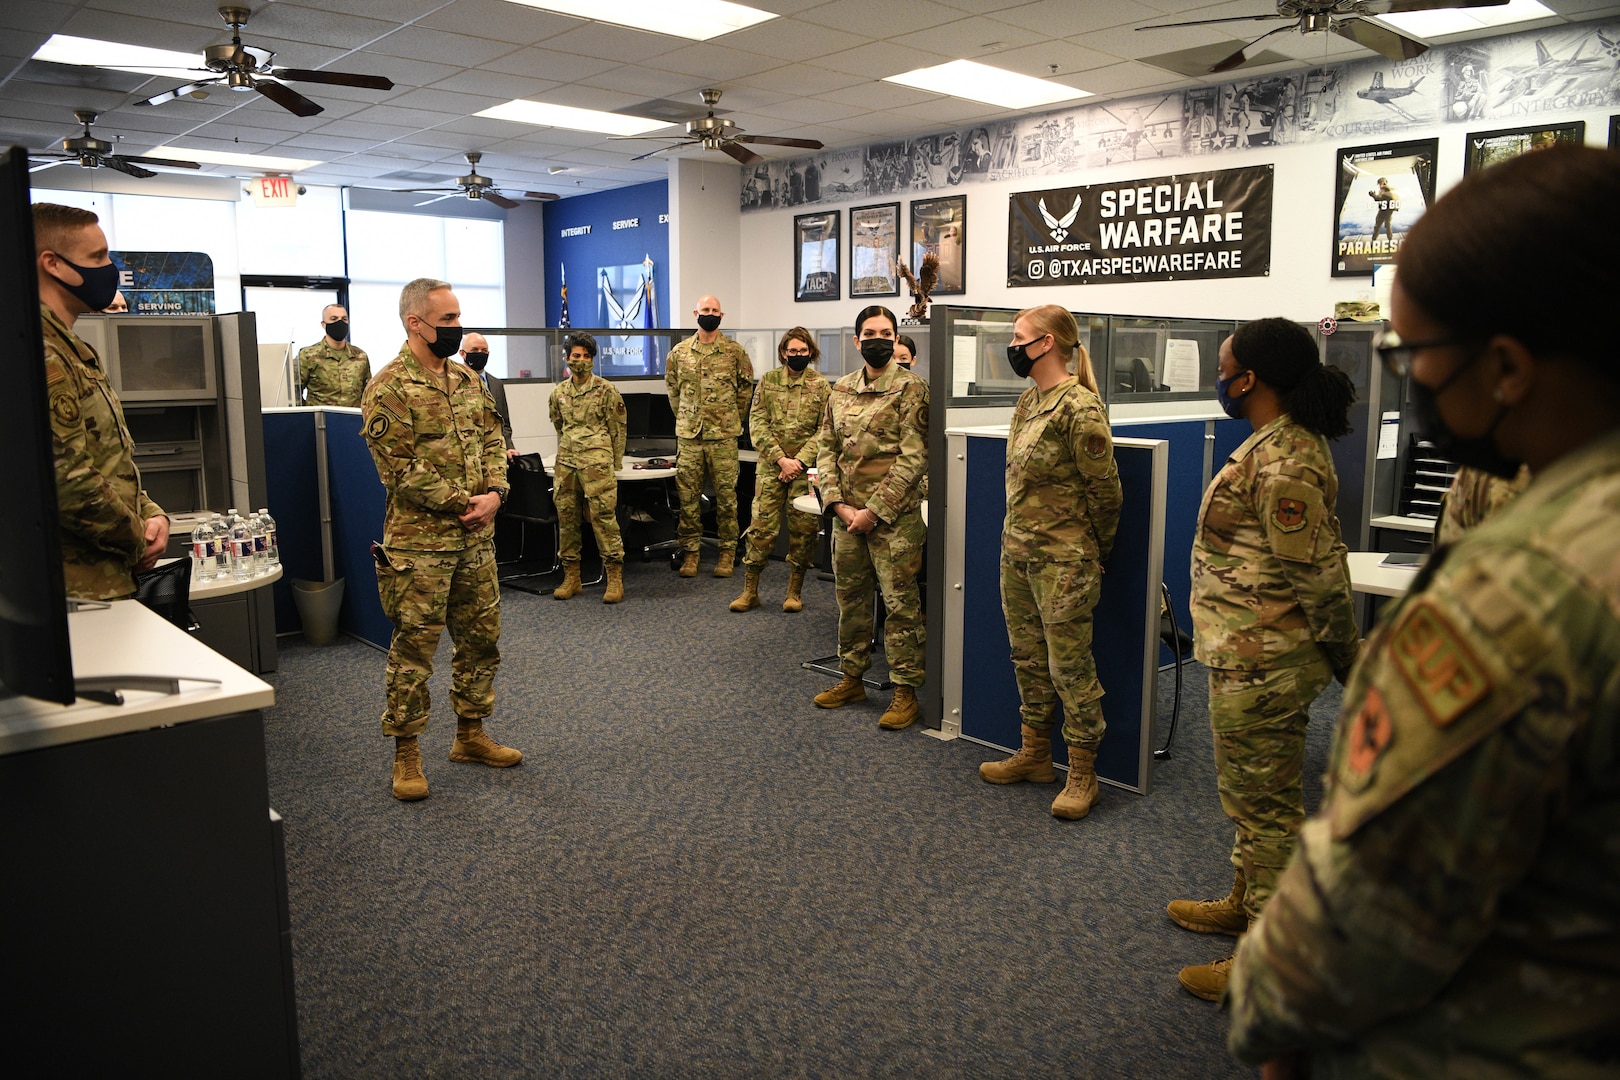 Senior Enlisted Advisor to the Chairman of the Joint Chiefs of Staff listens to a recruiter at the Live Oak, Texas recruiting station Feb. 9, 2022.